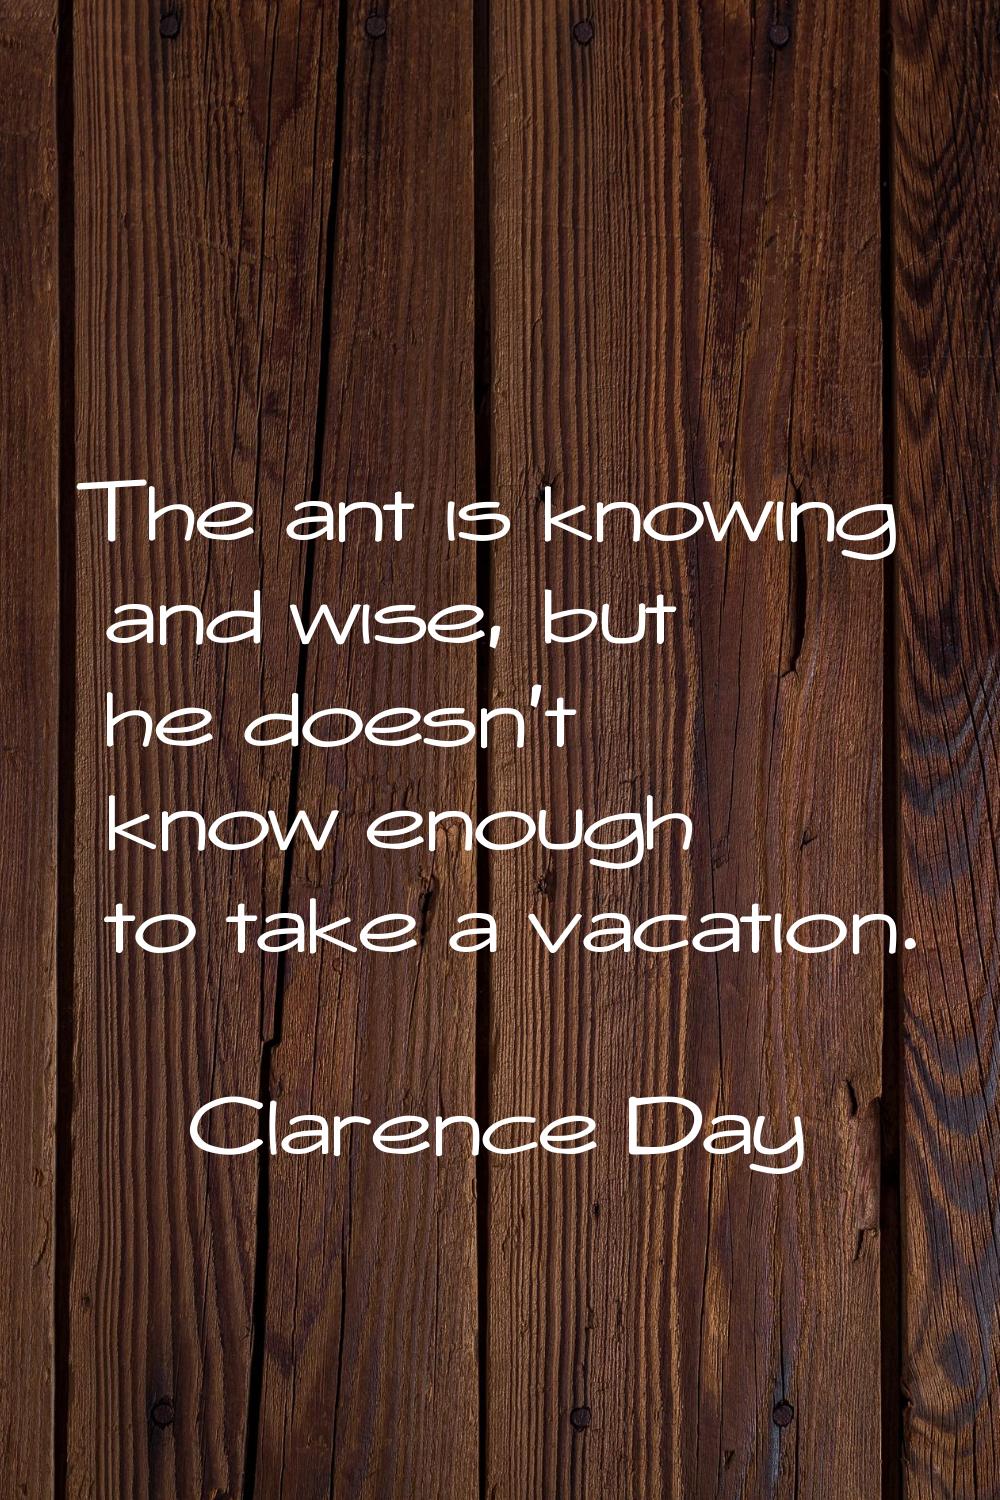 The ant is knowing and wise, but he doesn't know enough to take a vacation.